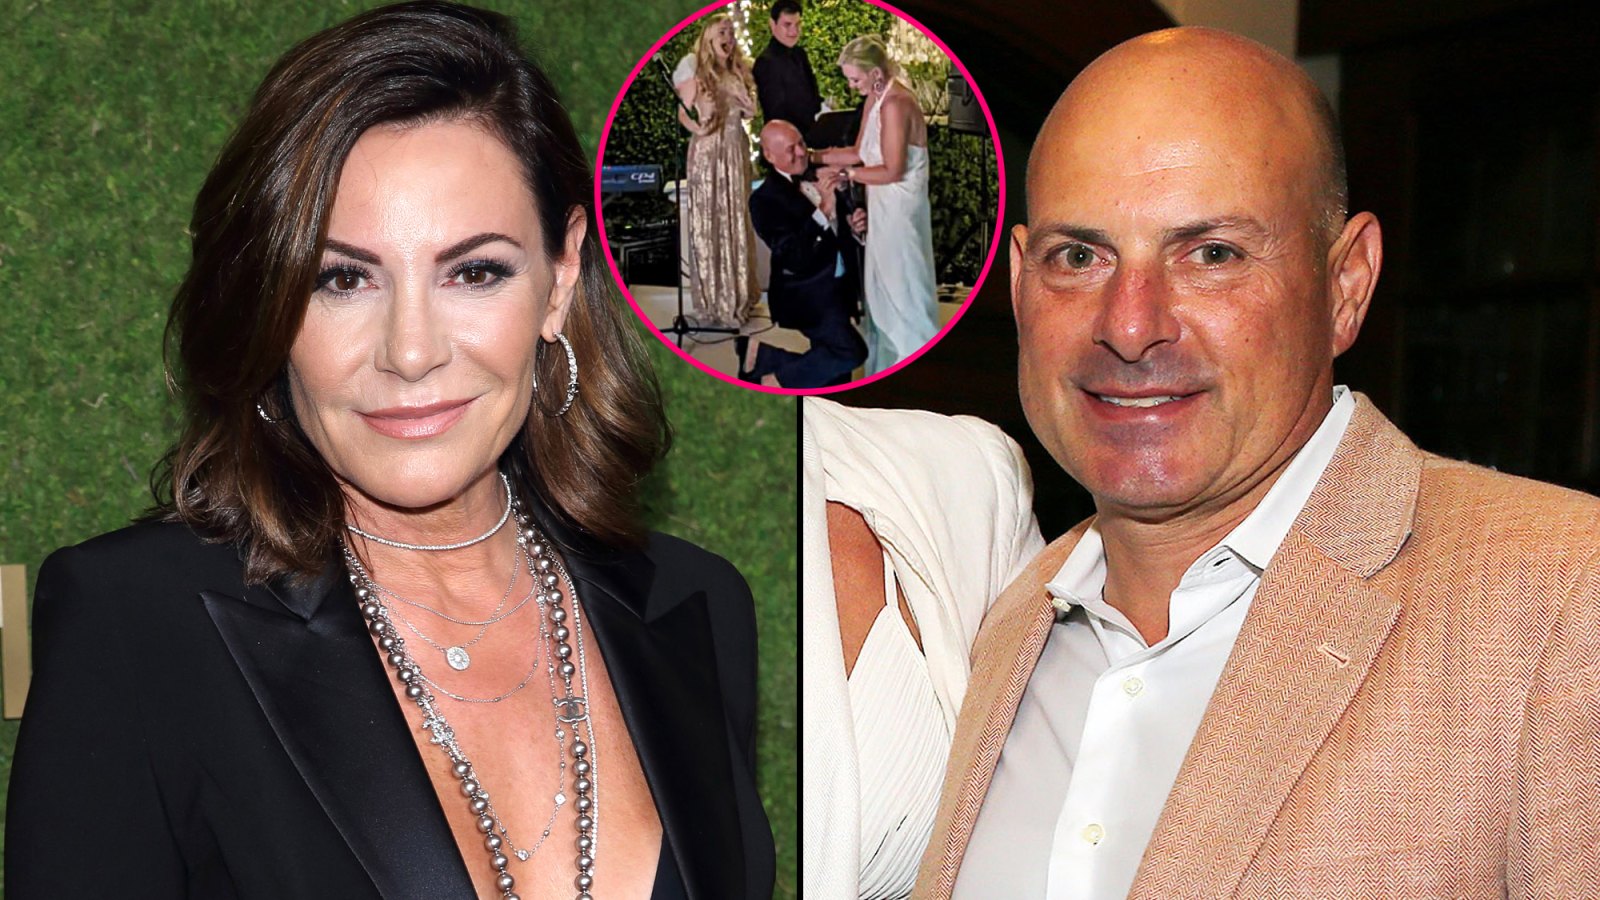 Luann de Lesseps’ Ex Tom D’Agostino Gets Engaged on Their Former Wedding Anniversary 5 Years Later